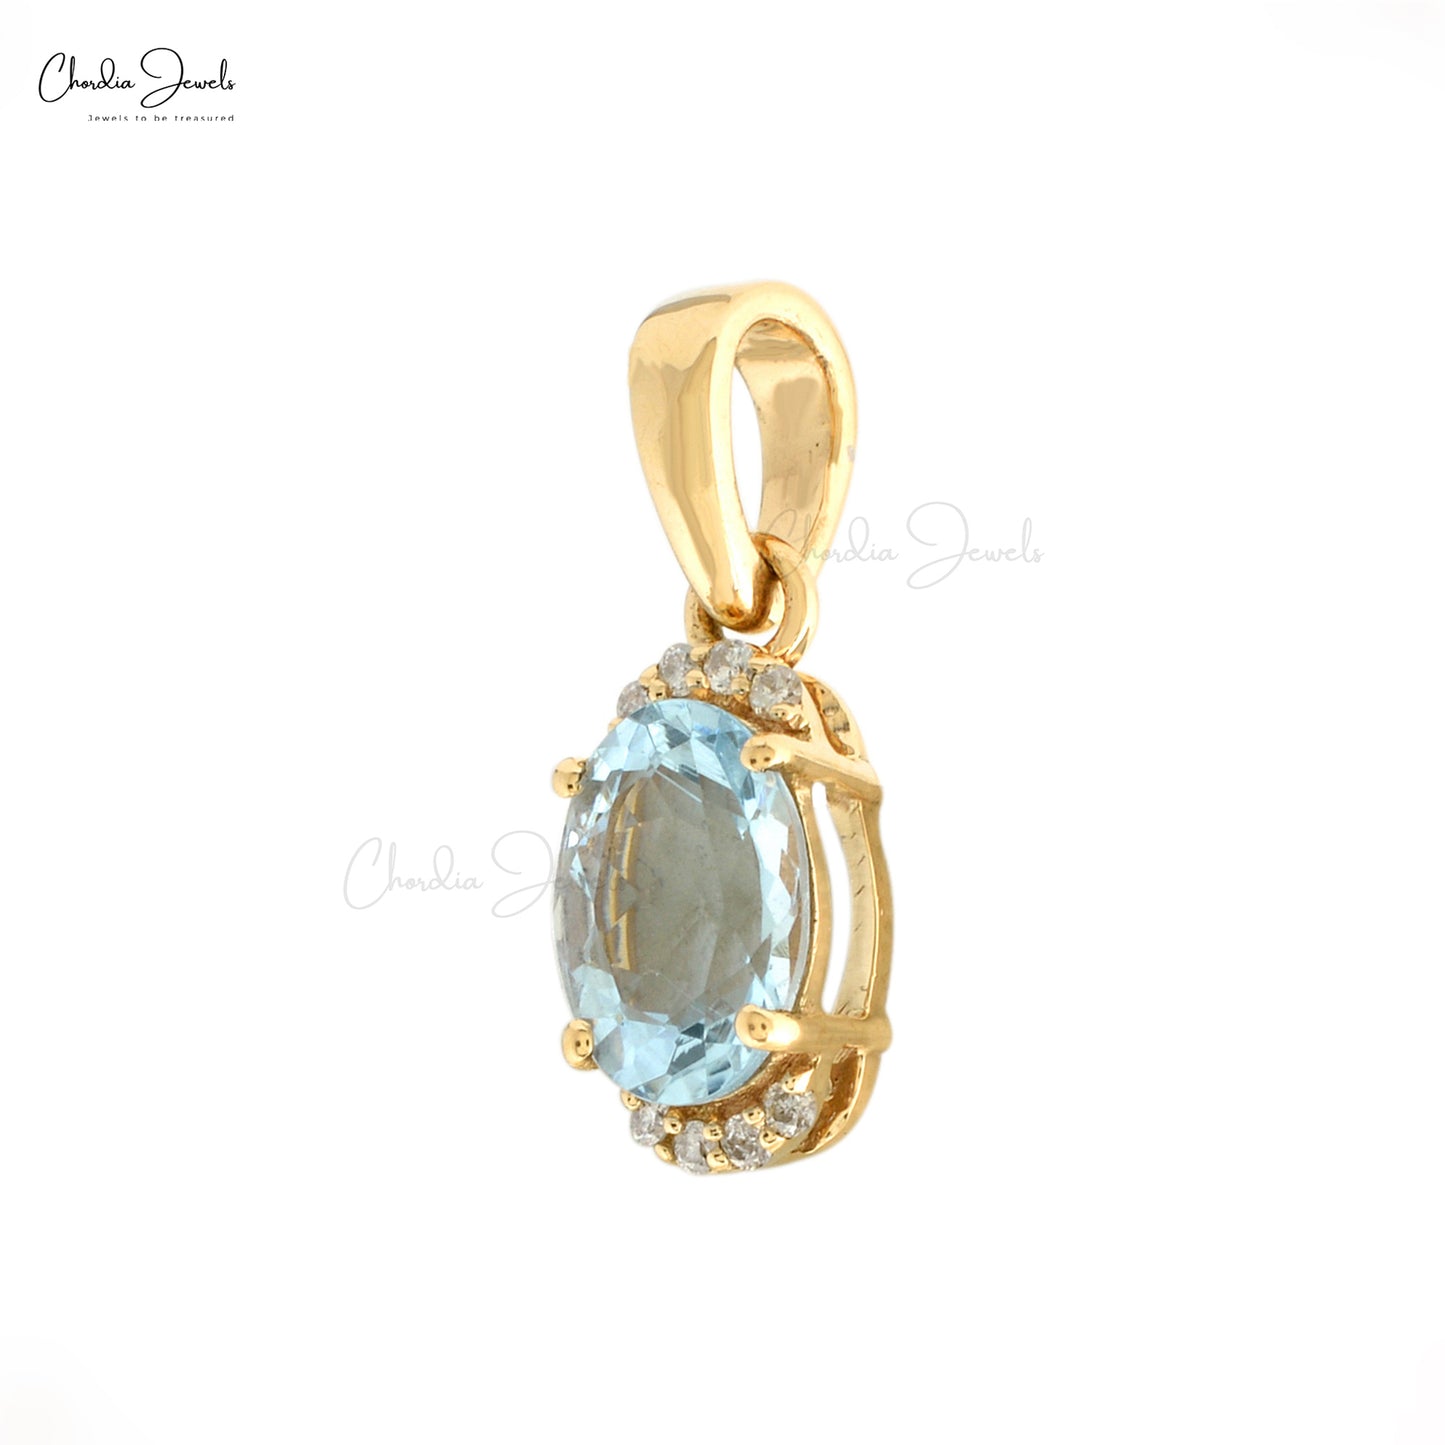 Designer Half Halo Pendant Necklace With 0.75 Ct Natural Aquamarine and White Diamond in 14k Real Gold Wedding Gift For Her